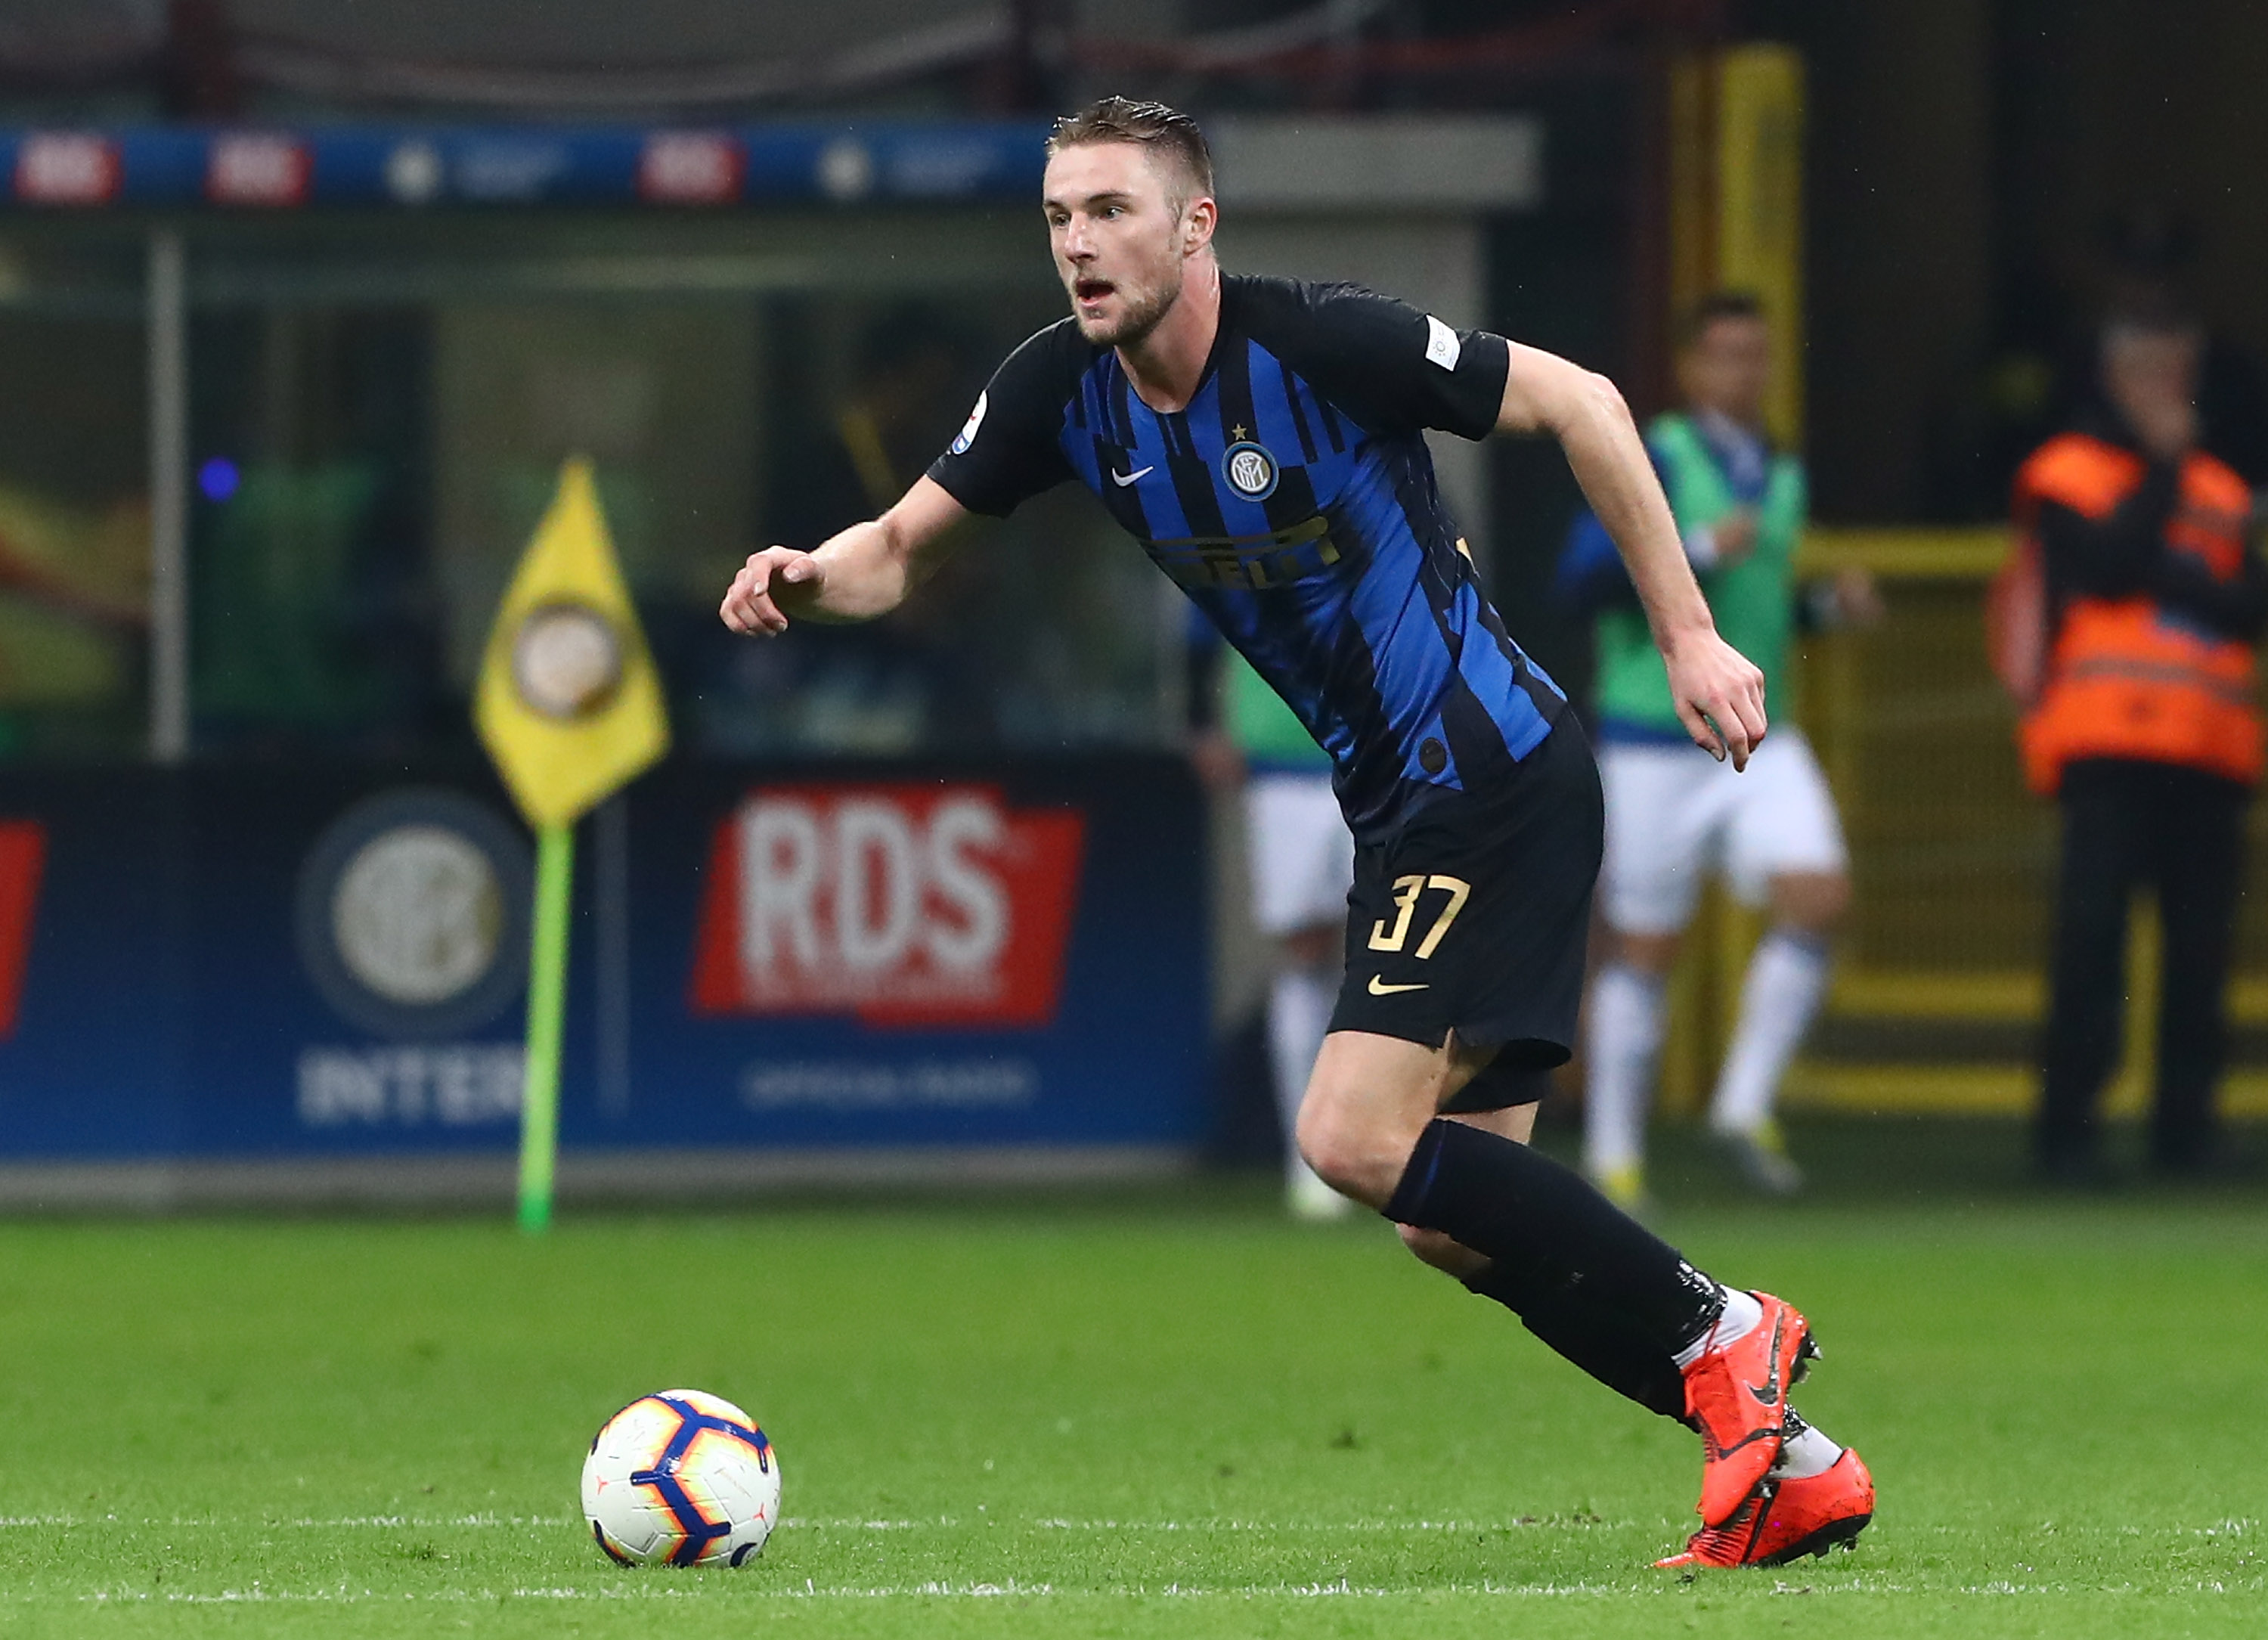 MILAN, ITALY - APRIL 07:  Milan Skriniar of FC Internazionale in action during the Serie A match between FC Internazionale and Atalanta BC at Stadio Giuseppe Meazza on April 7, 2019 in Milan, Italy.  (Photo by Marco Luzzani - Inter/Inter via Getty Images)